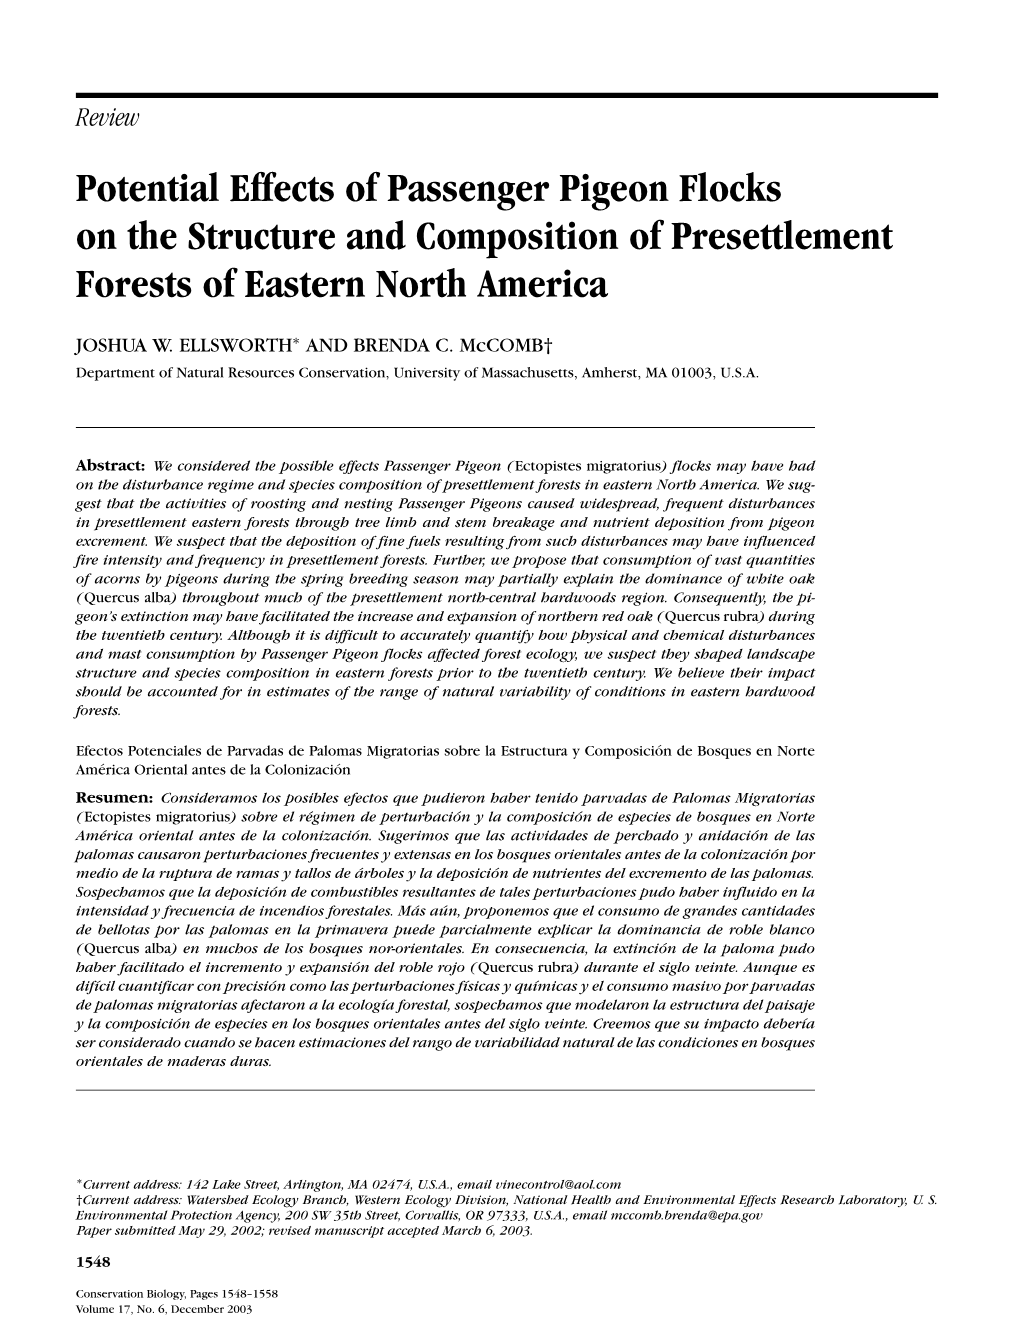 Potential Effects of Passenger Pigeon Flocks on the Structure and Composition of Presettlement Forests of Eastern North America